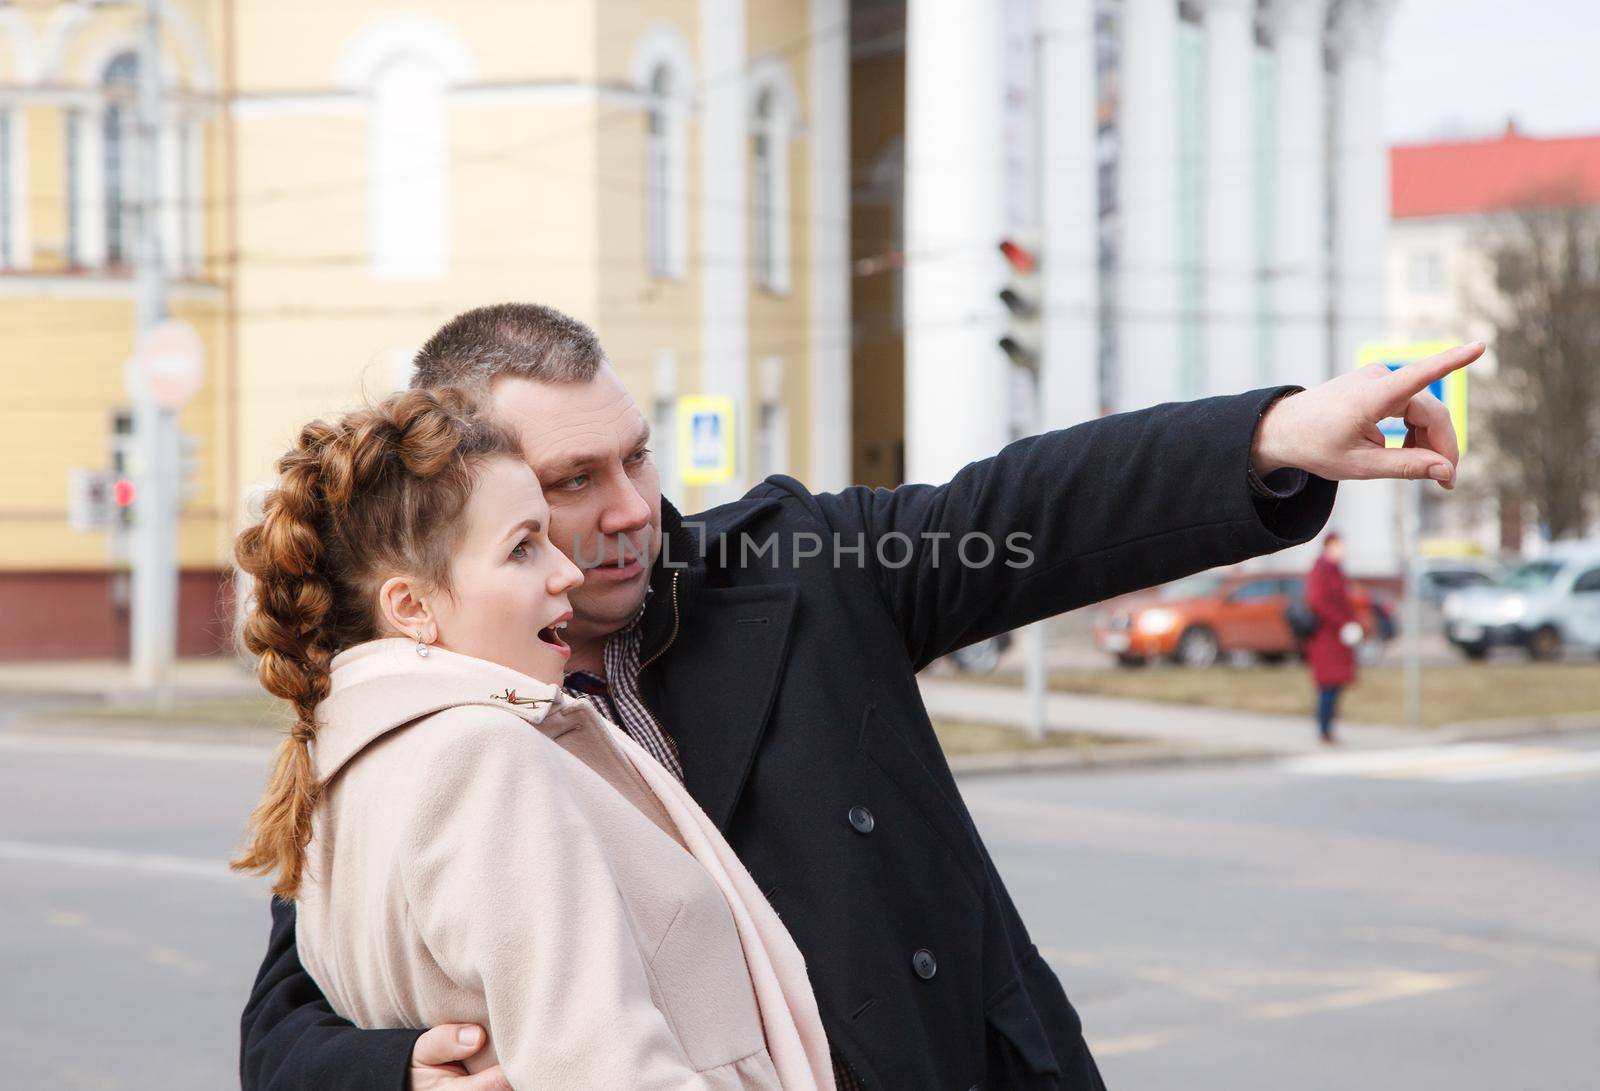 married couple walking along a city street on spring day